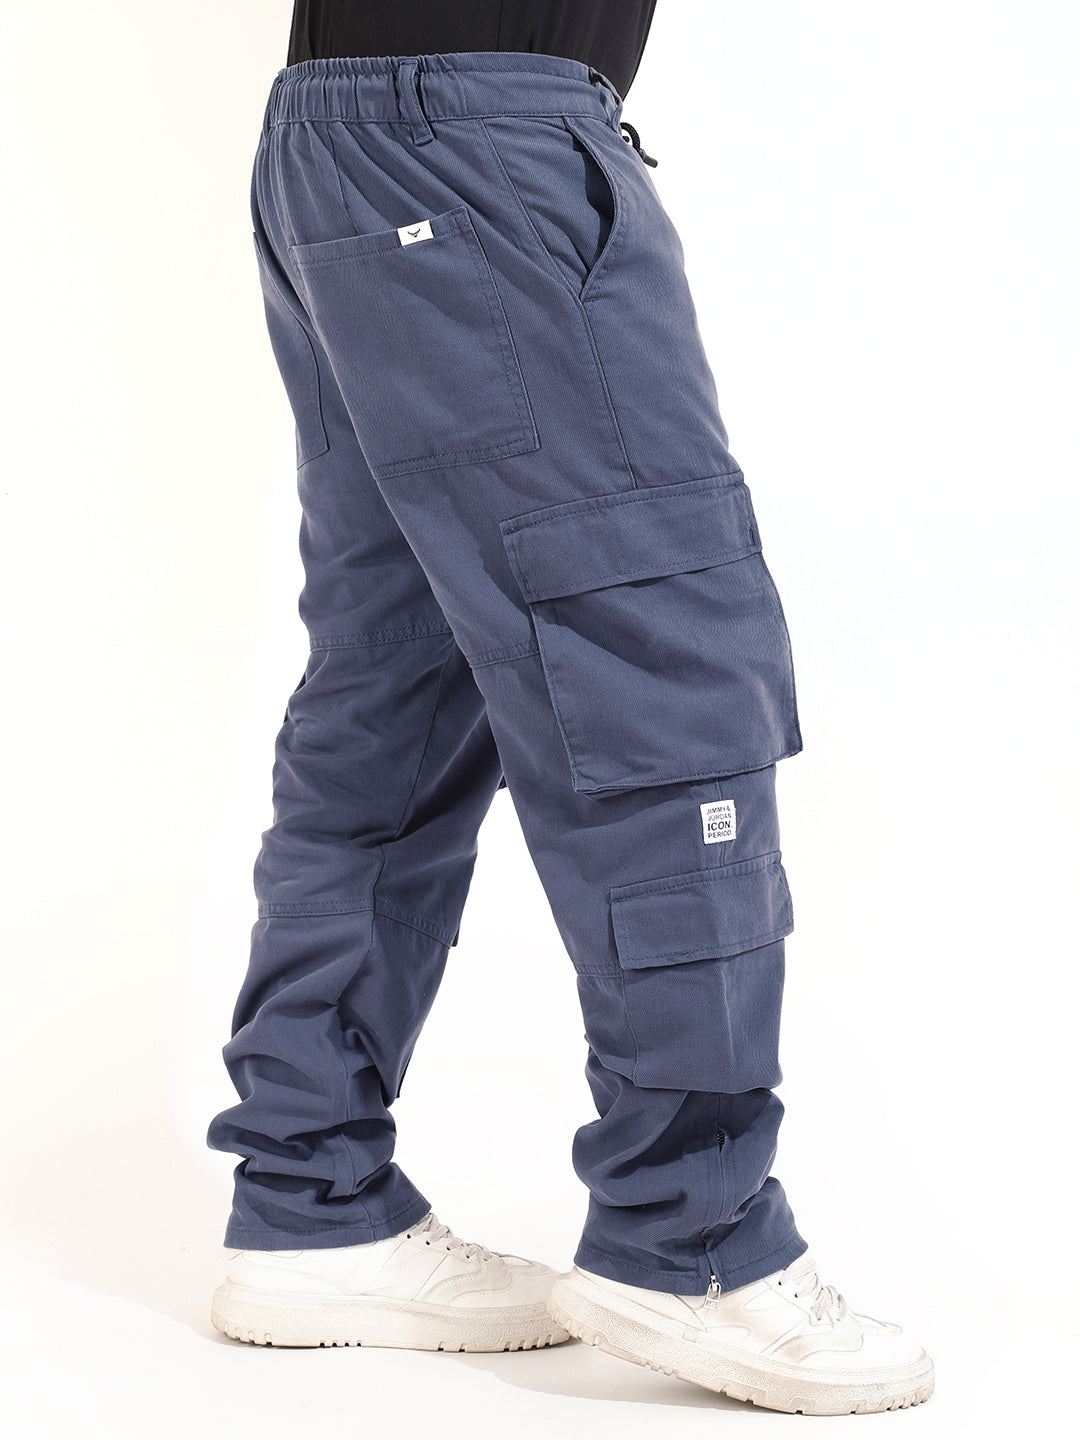 Ash Grey Cotton Drill 8 pocket Baggy Fit Cargo